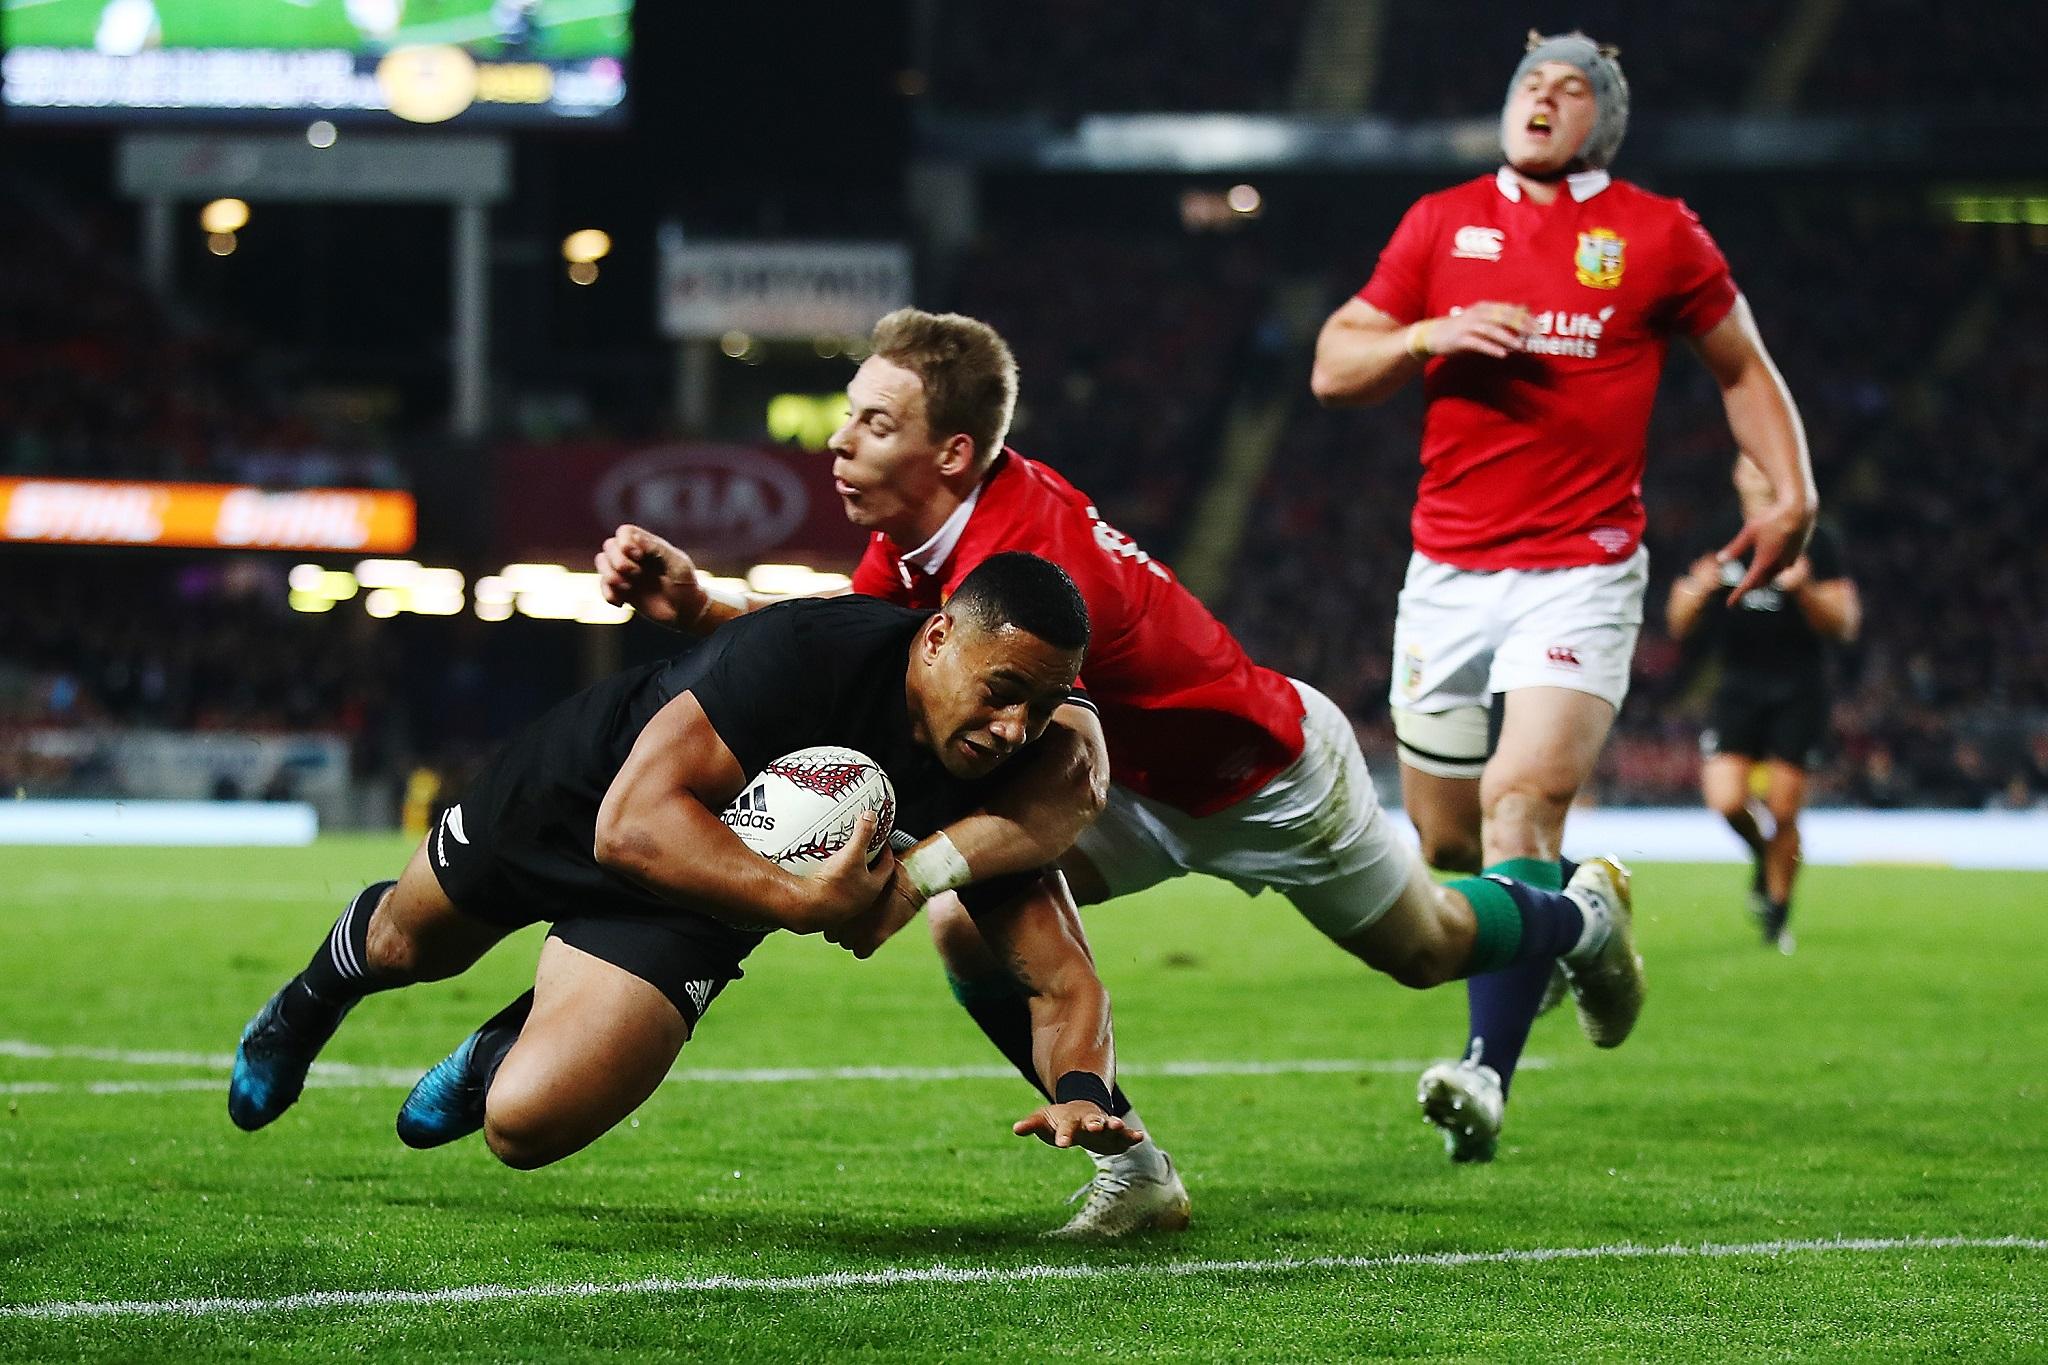 The British and Irish Lions have the chance to beat the All Blacks for the first time in 46 years